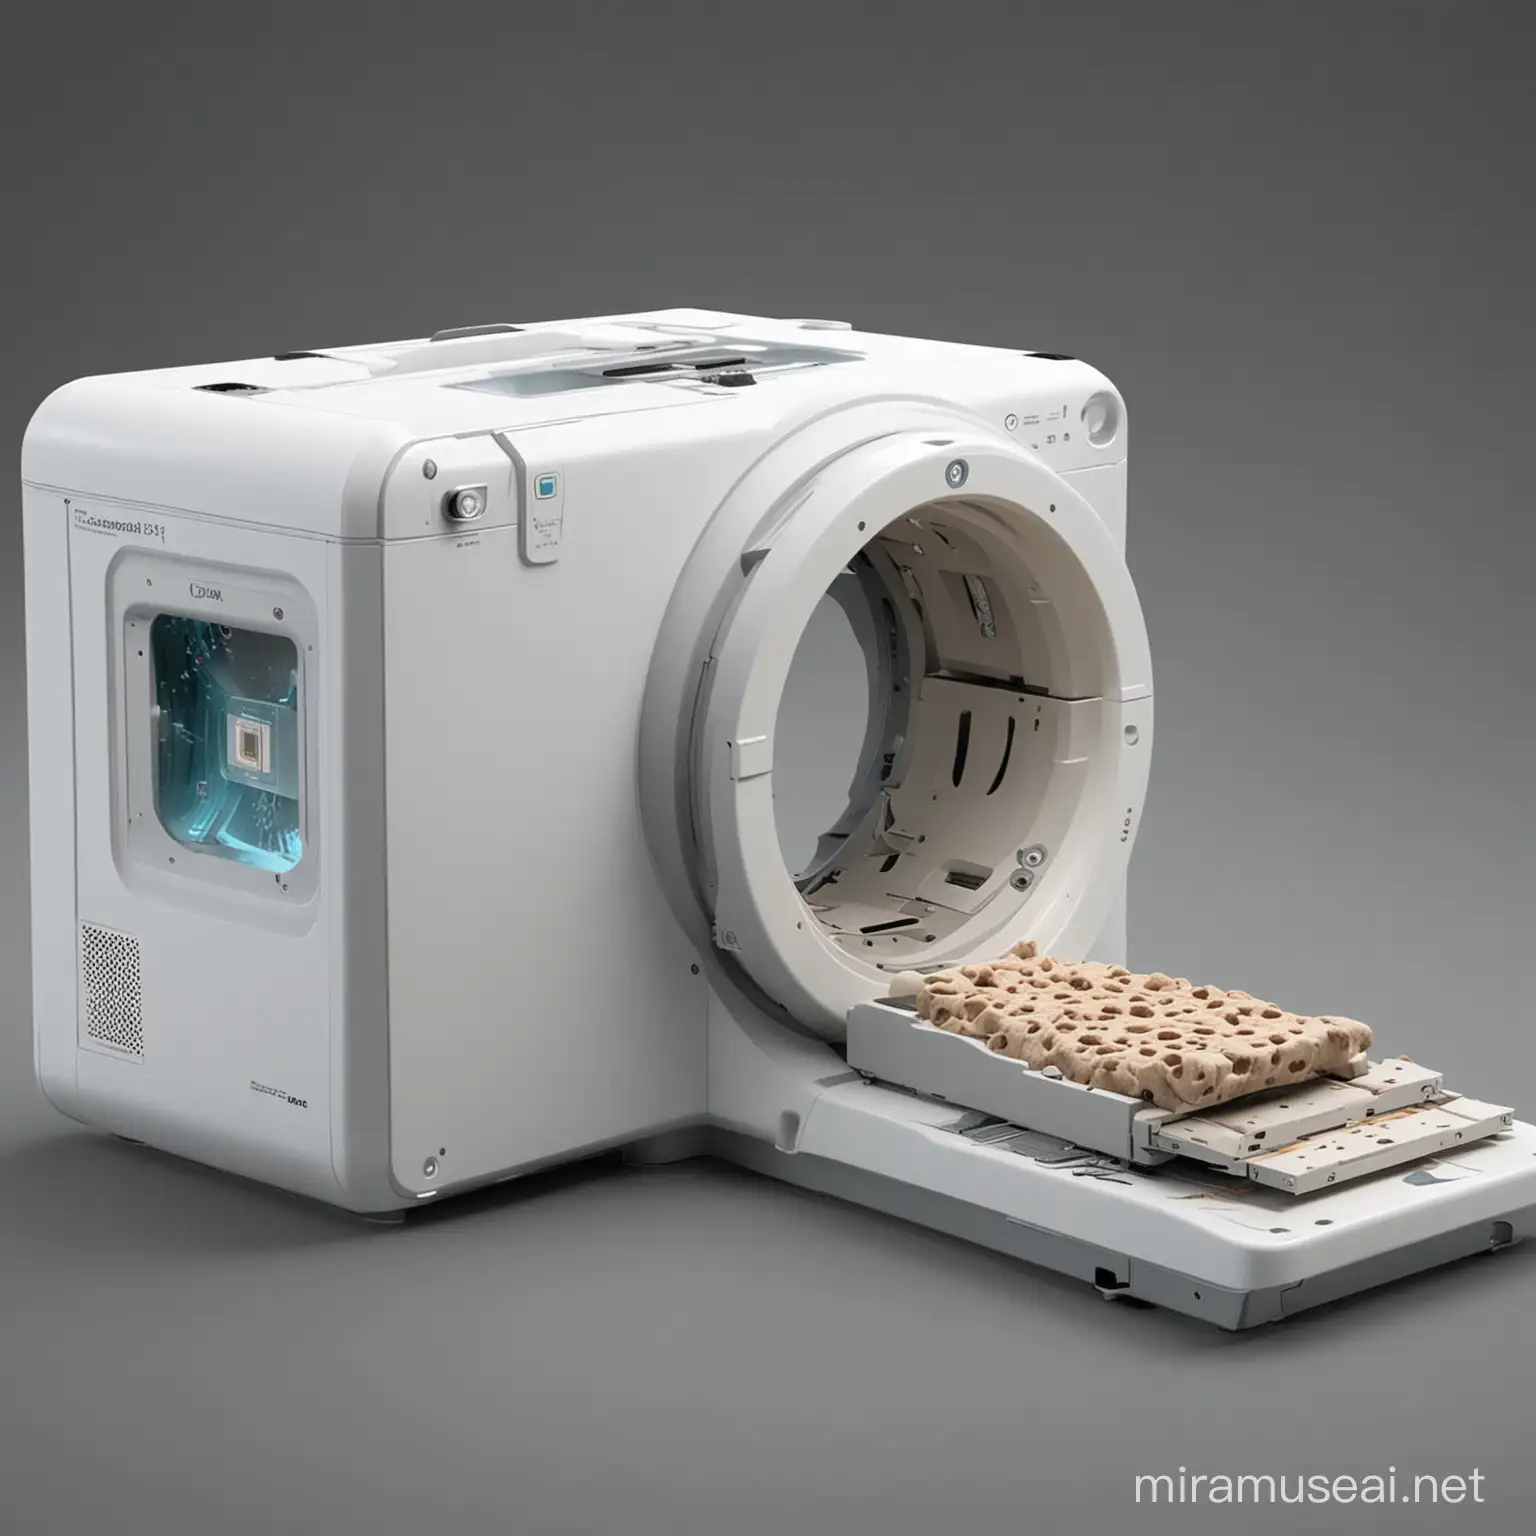 create a realistic image of a pet scanner with exploded view